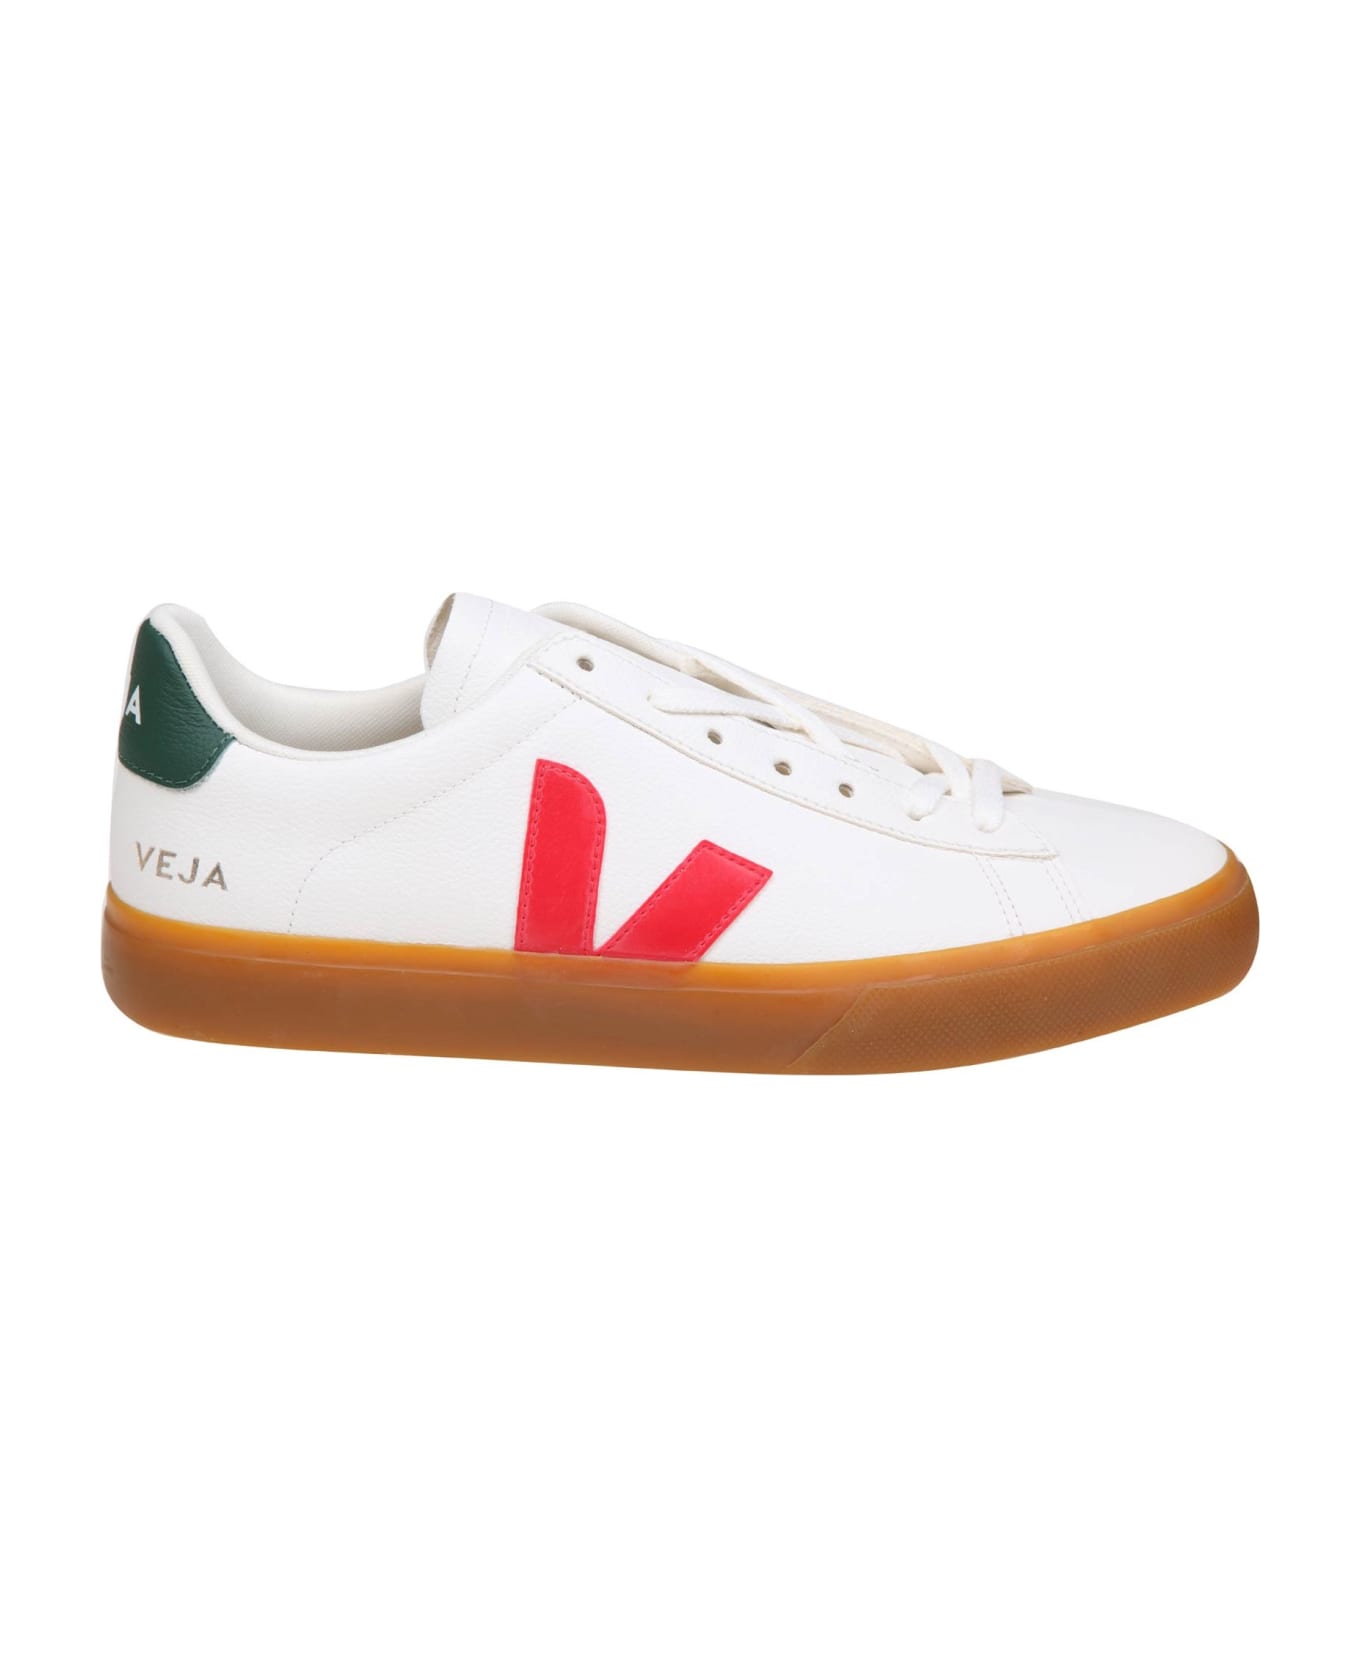 Veja Campo Chromefree In White/red And Green Leather - WHITE/POKER